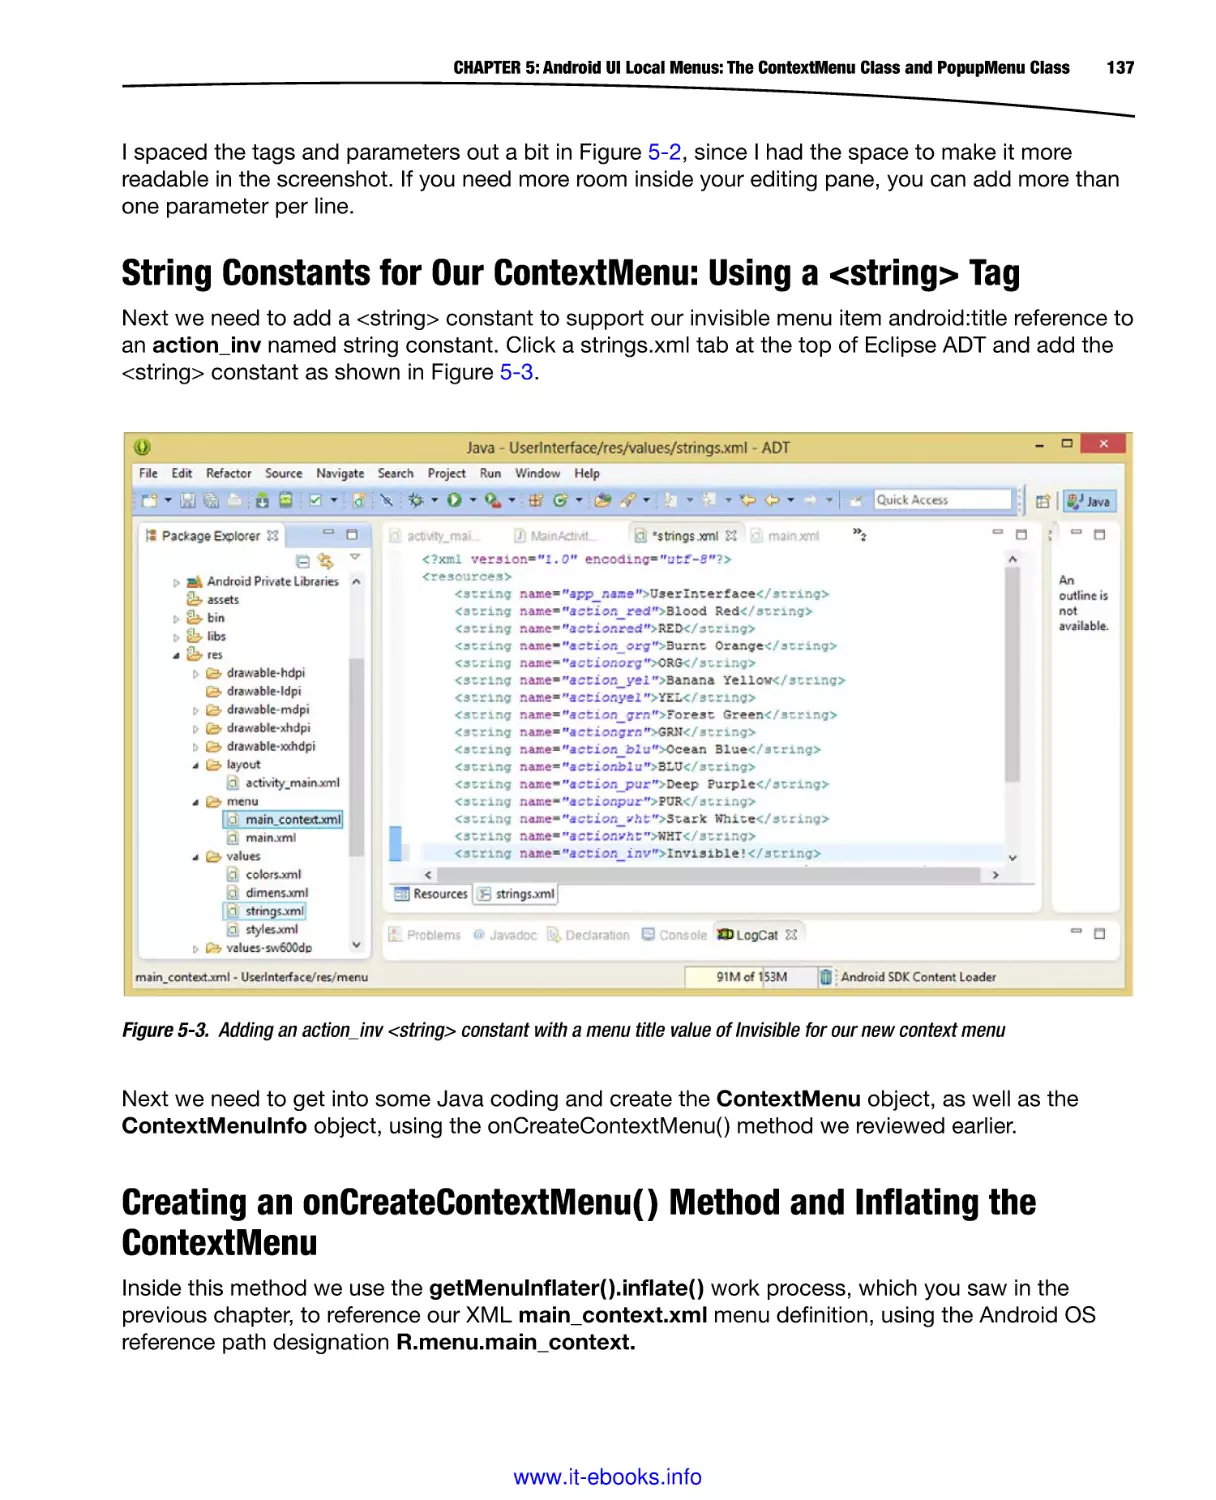 String Constants for Our ContextMenu
Creating an onCreateContextMenu( ) Method and Inflating the ContextMenu